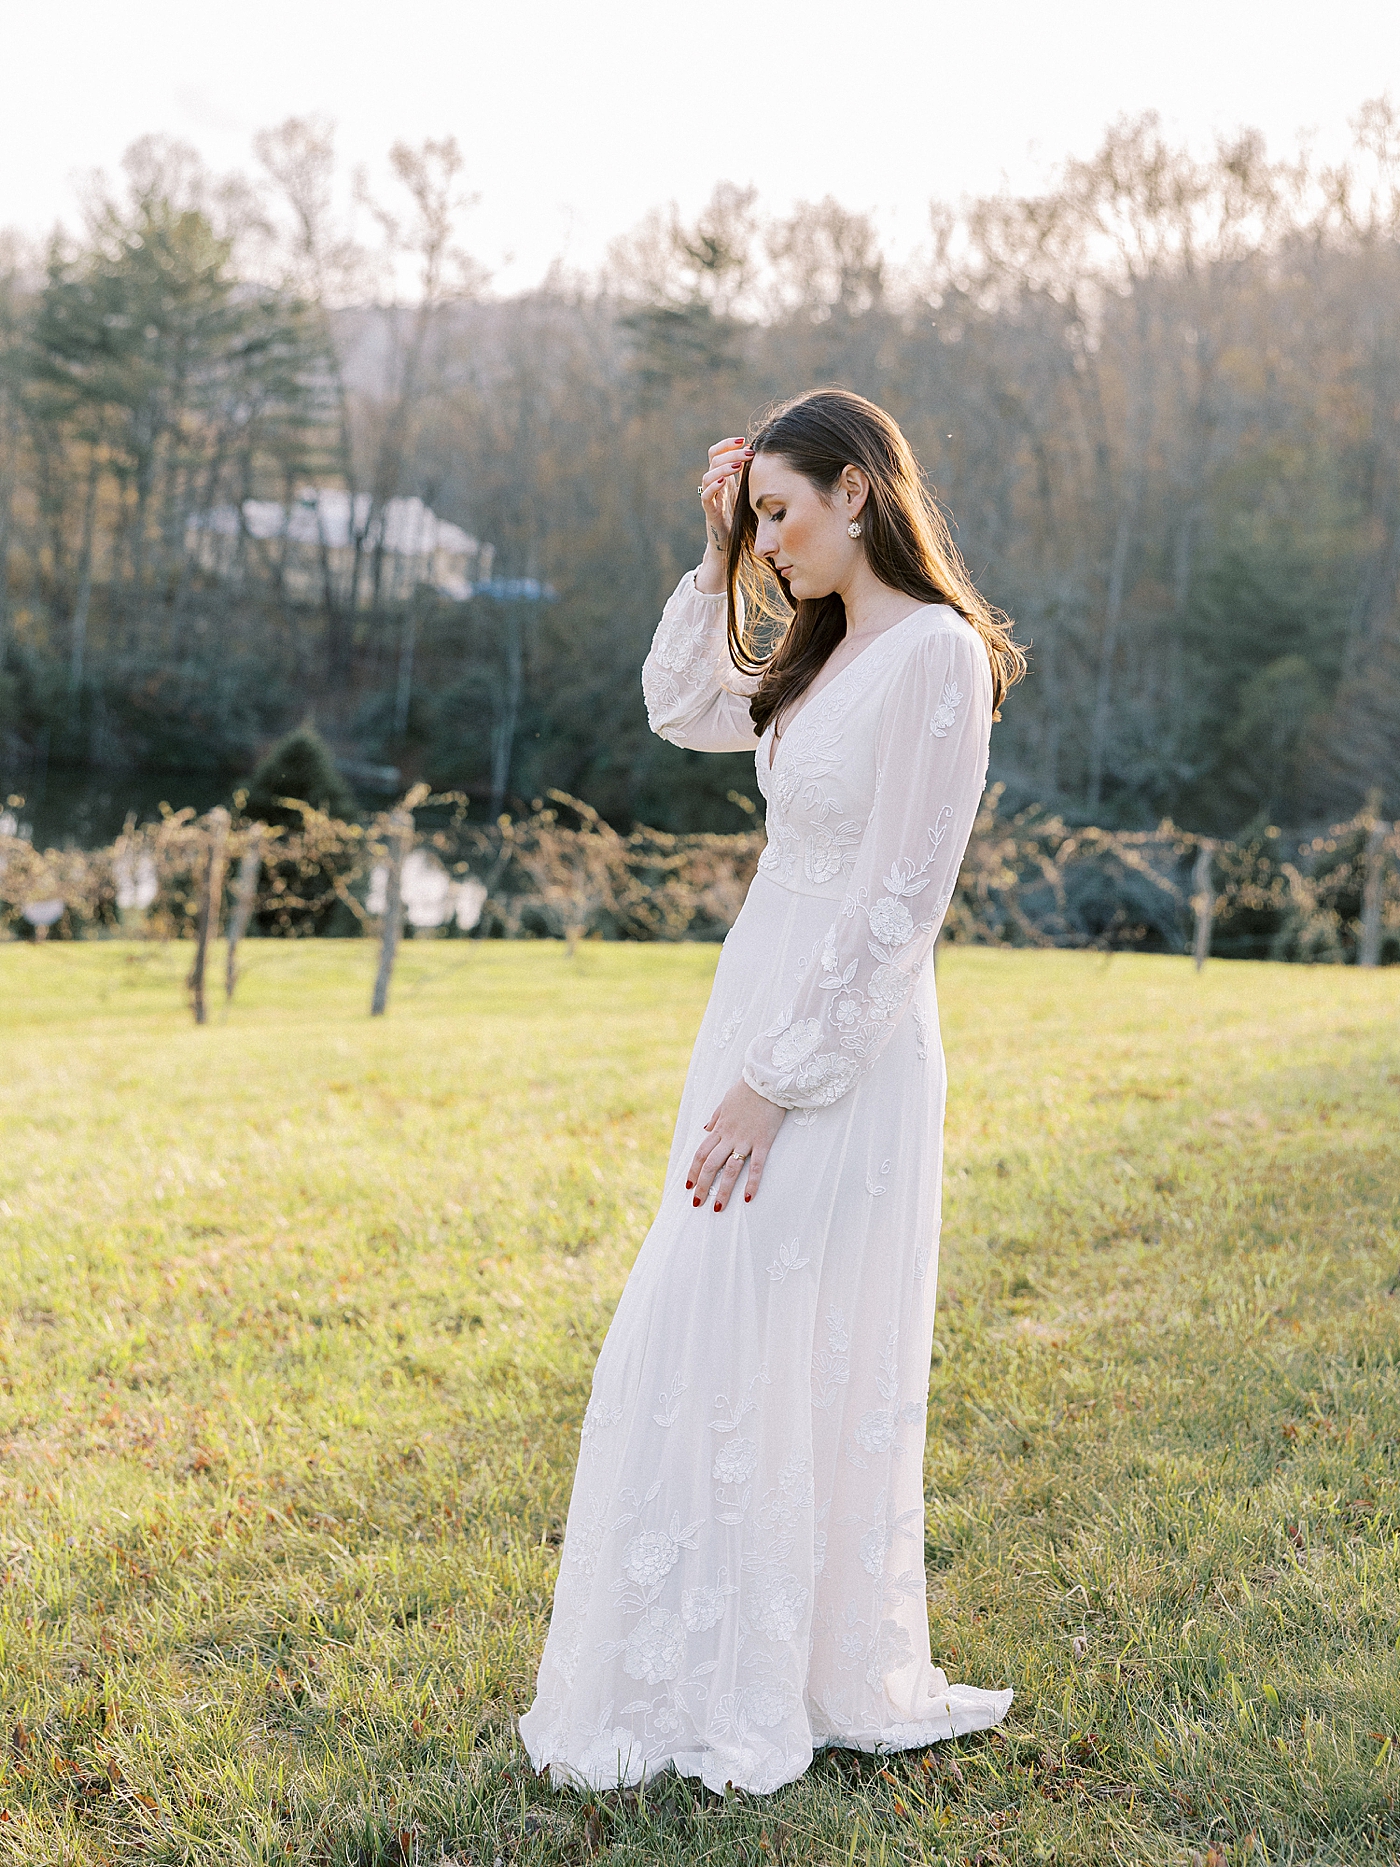 Bride in a white gown after her North Carolina Wedding | Photo by Diane Sotero Photography